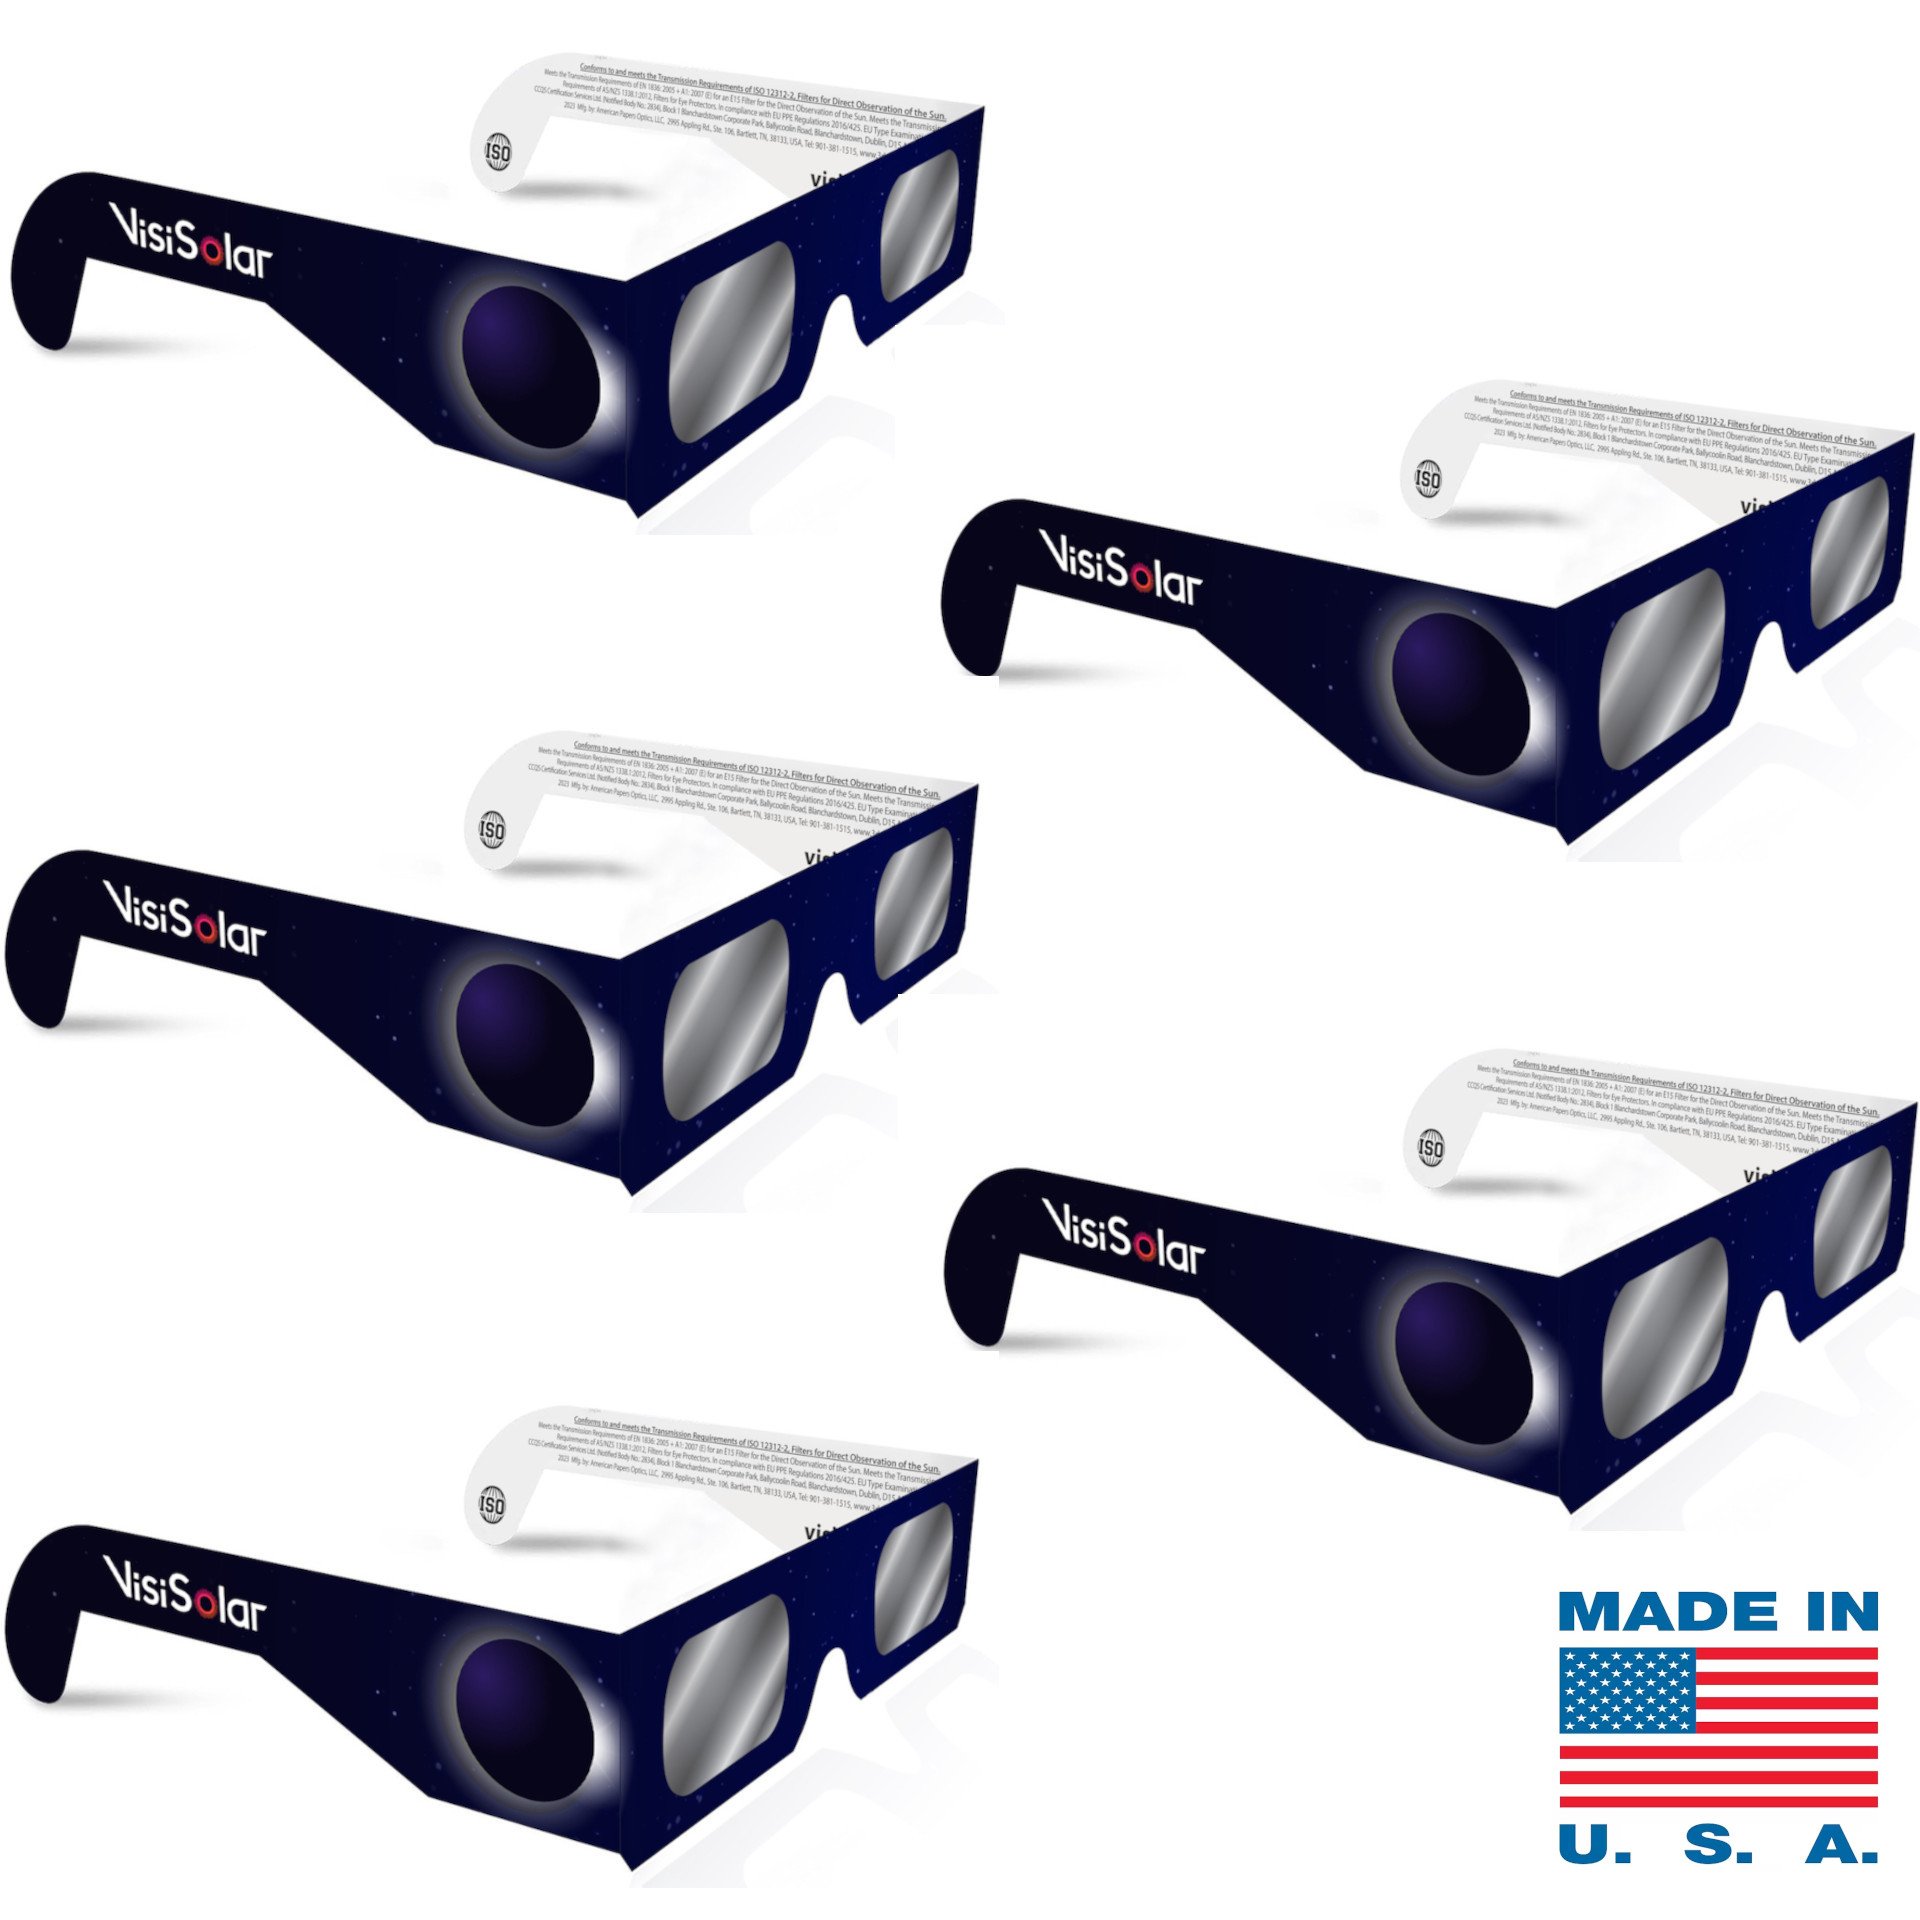 VisiSolar Solar Eclipse Glasses Made in USA (Pack of 5) CE ISO Certified NASA Approved Glasses - image 1 of 10